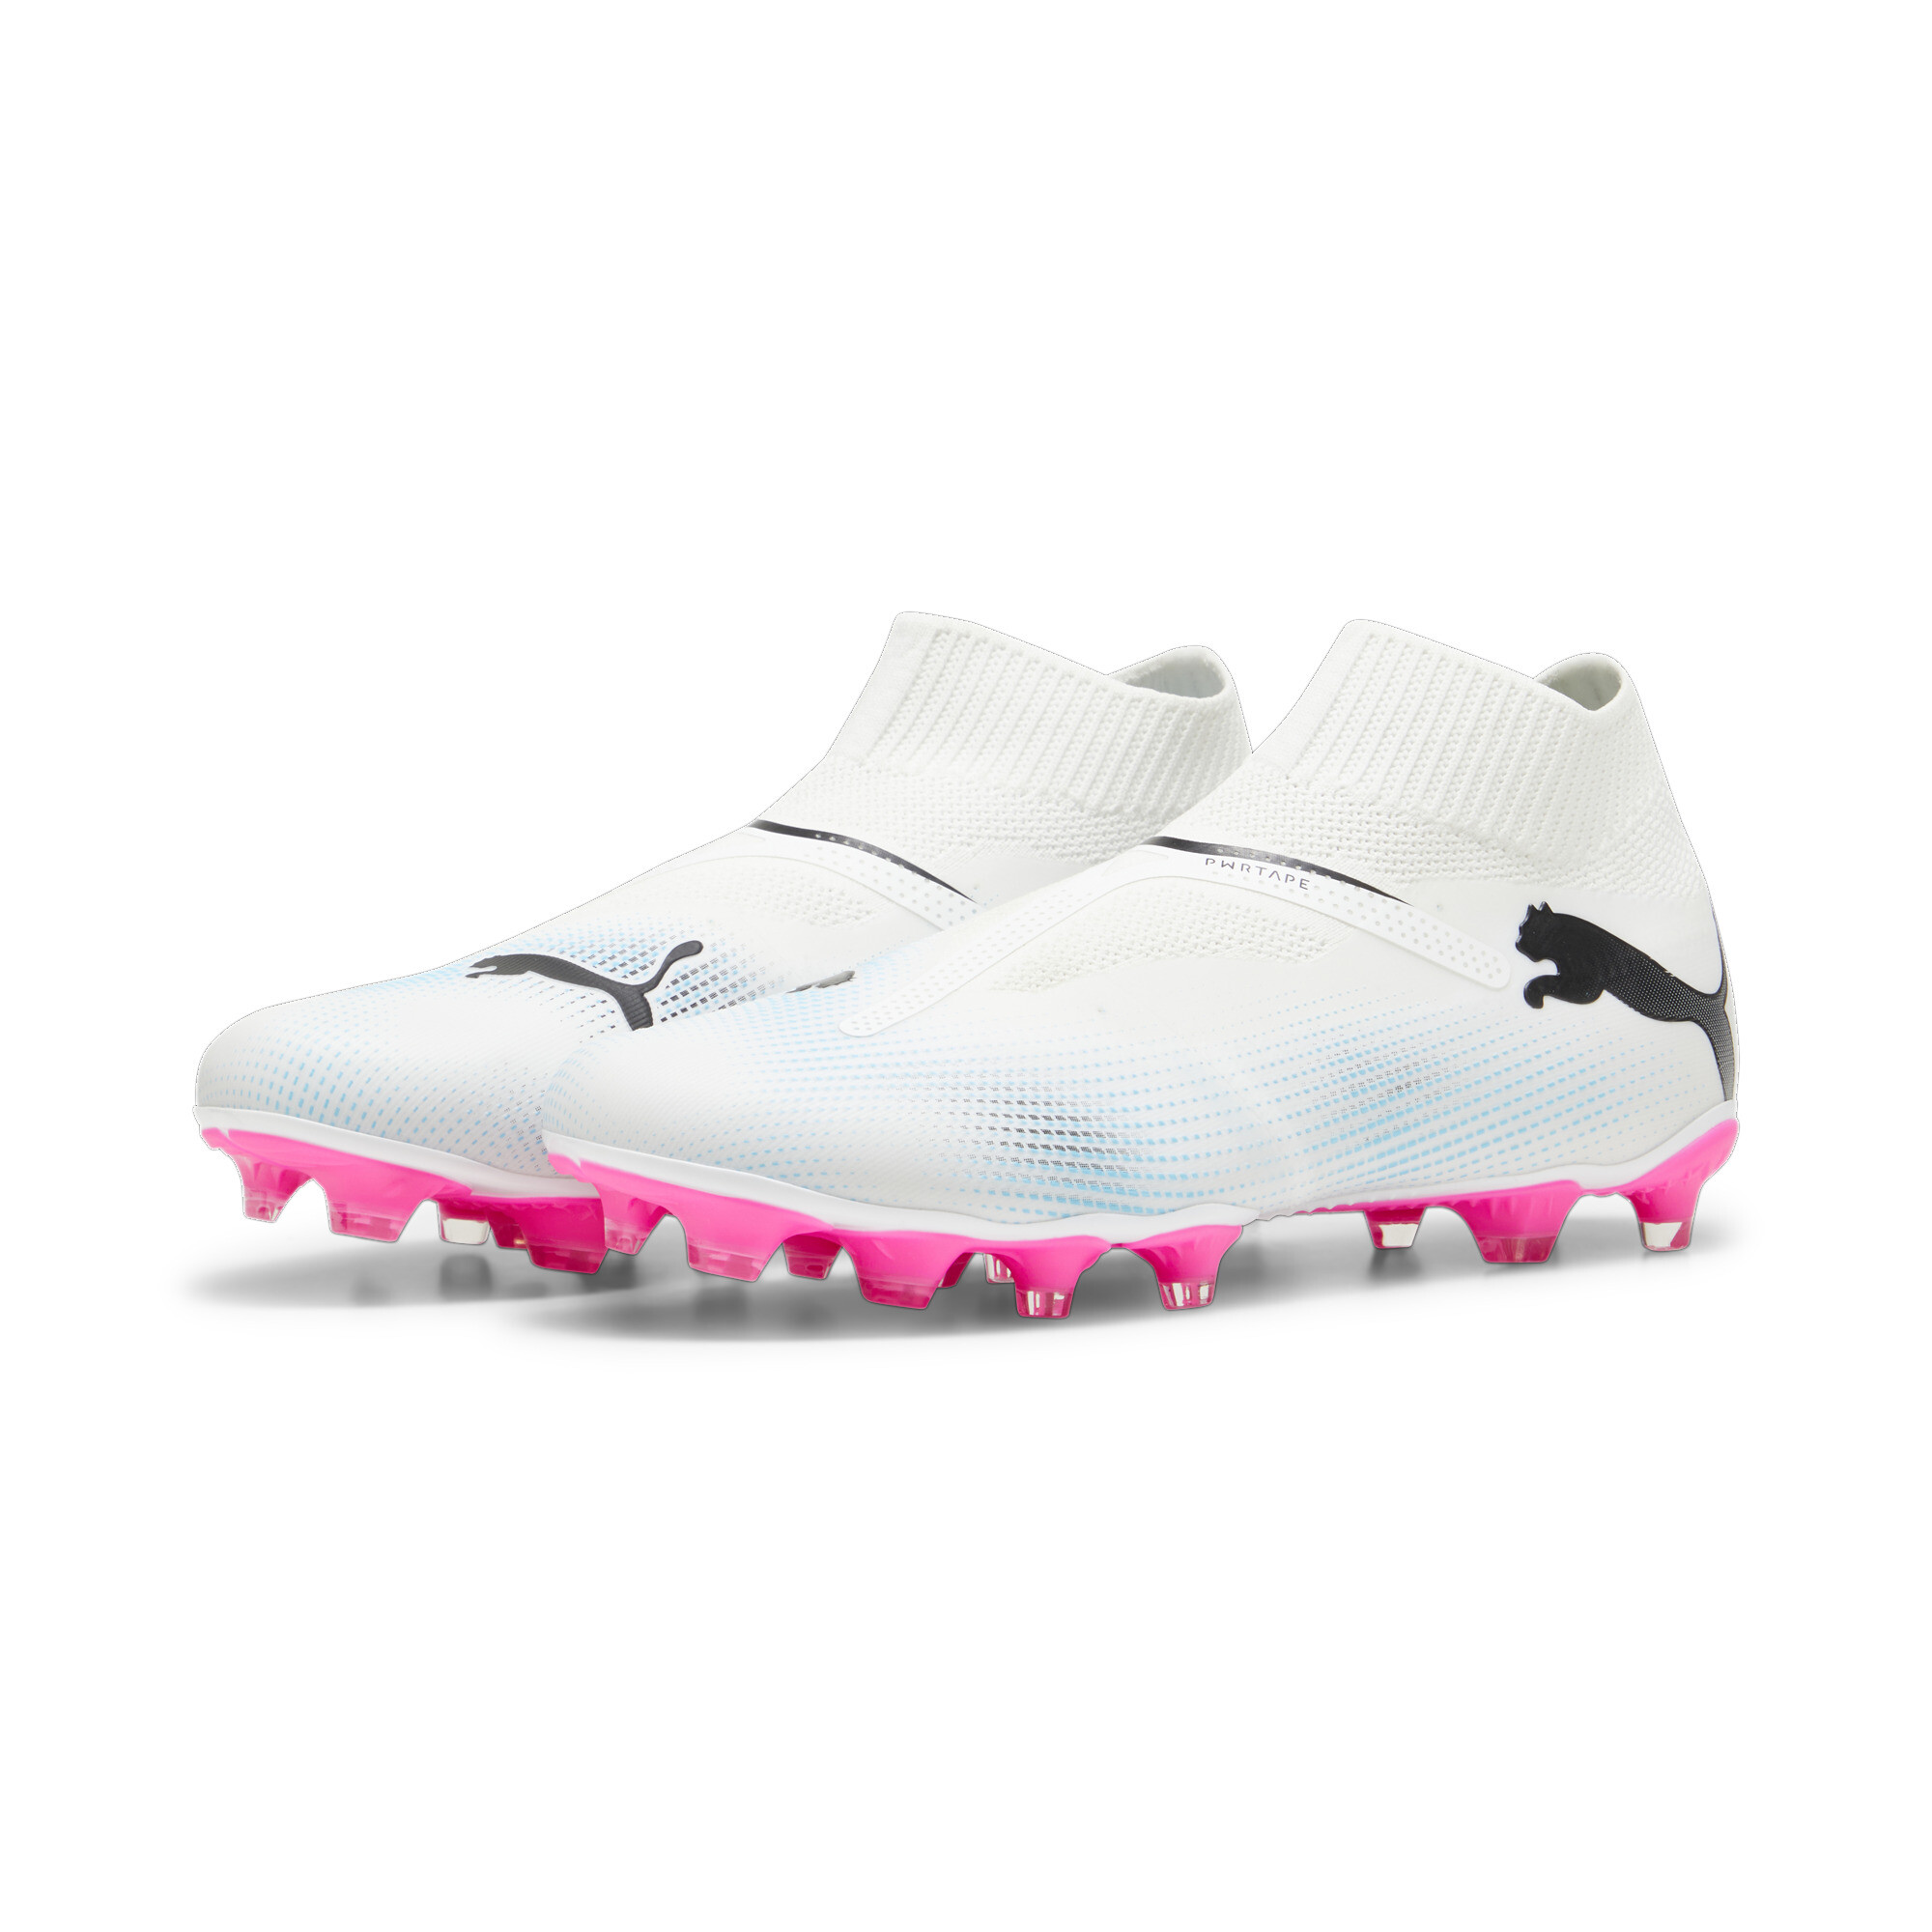 Men's PUMA FUTURE 7 MATCH FG/AG Laceless Football Boots In White/Pink, Size EU 43